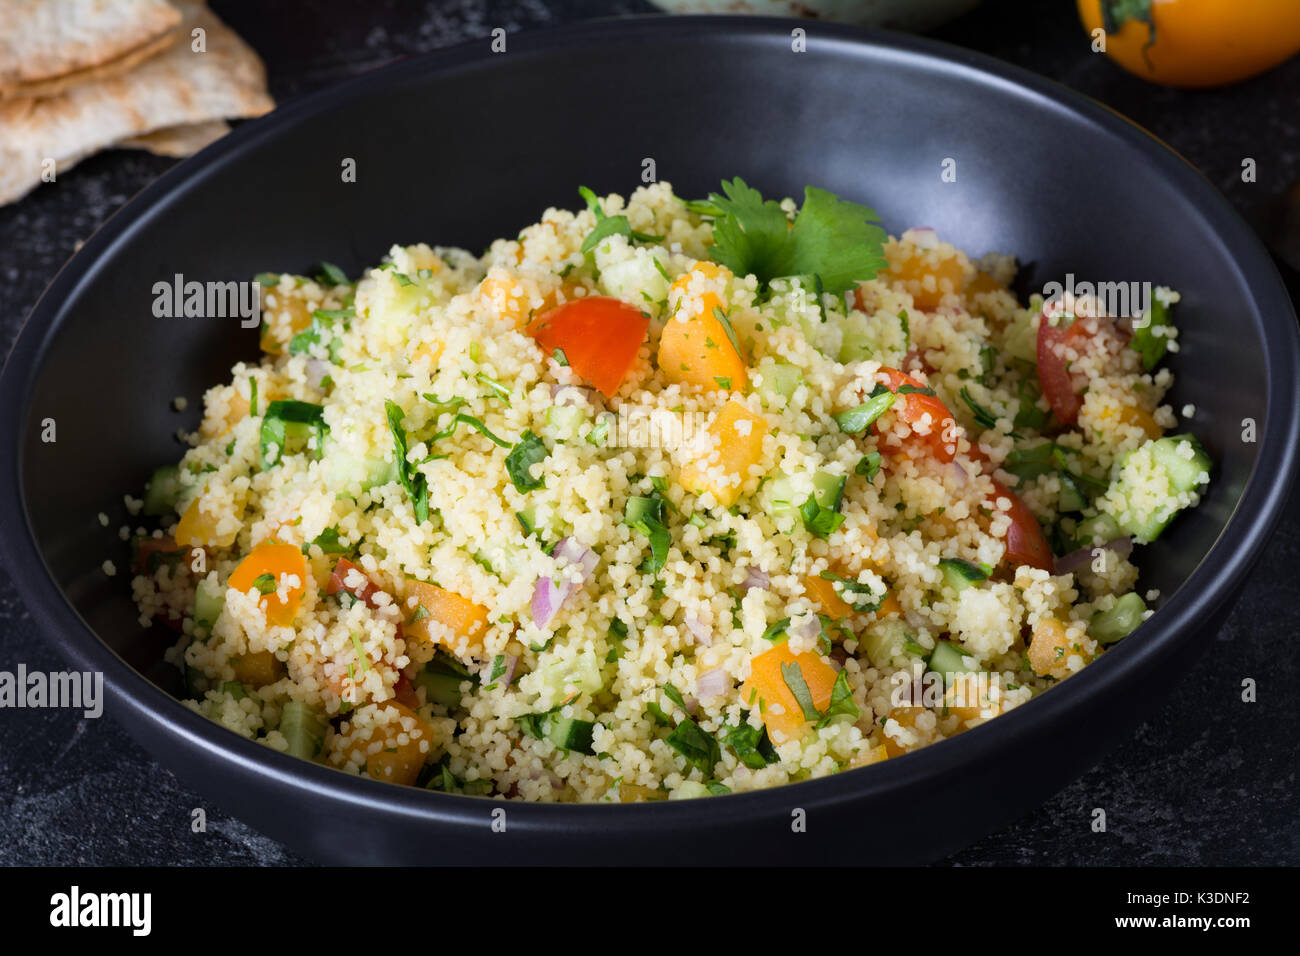 Lebanese arabic cuisine: healthy delicious salad with cous cous, fresh vegetables and greens called Tabbouleh in black bowl. Authentic food bowl Stock Photo